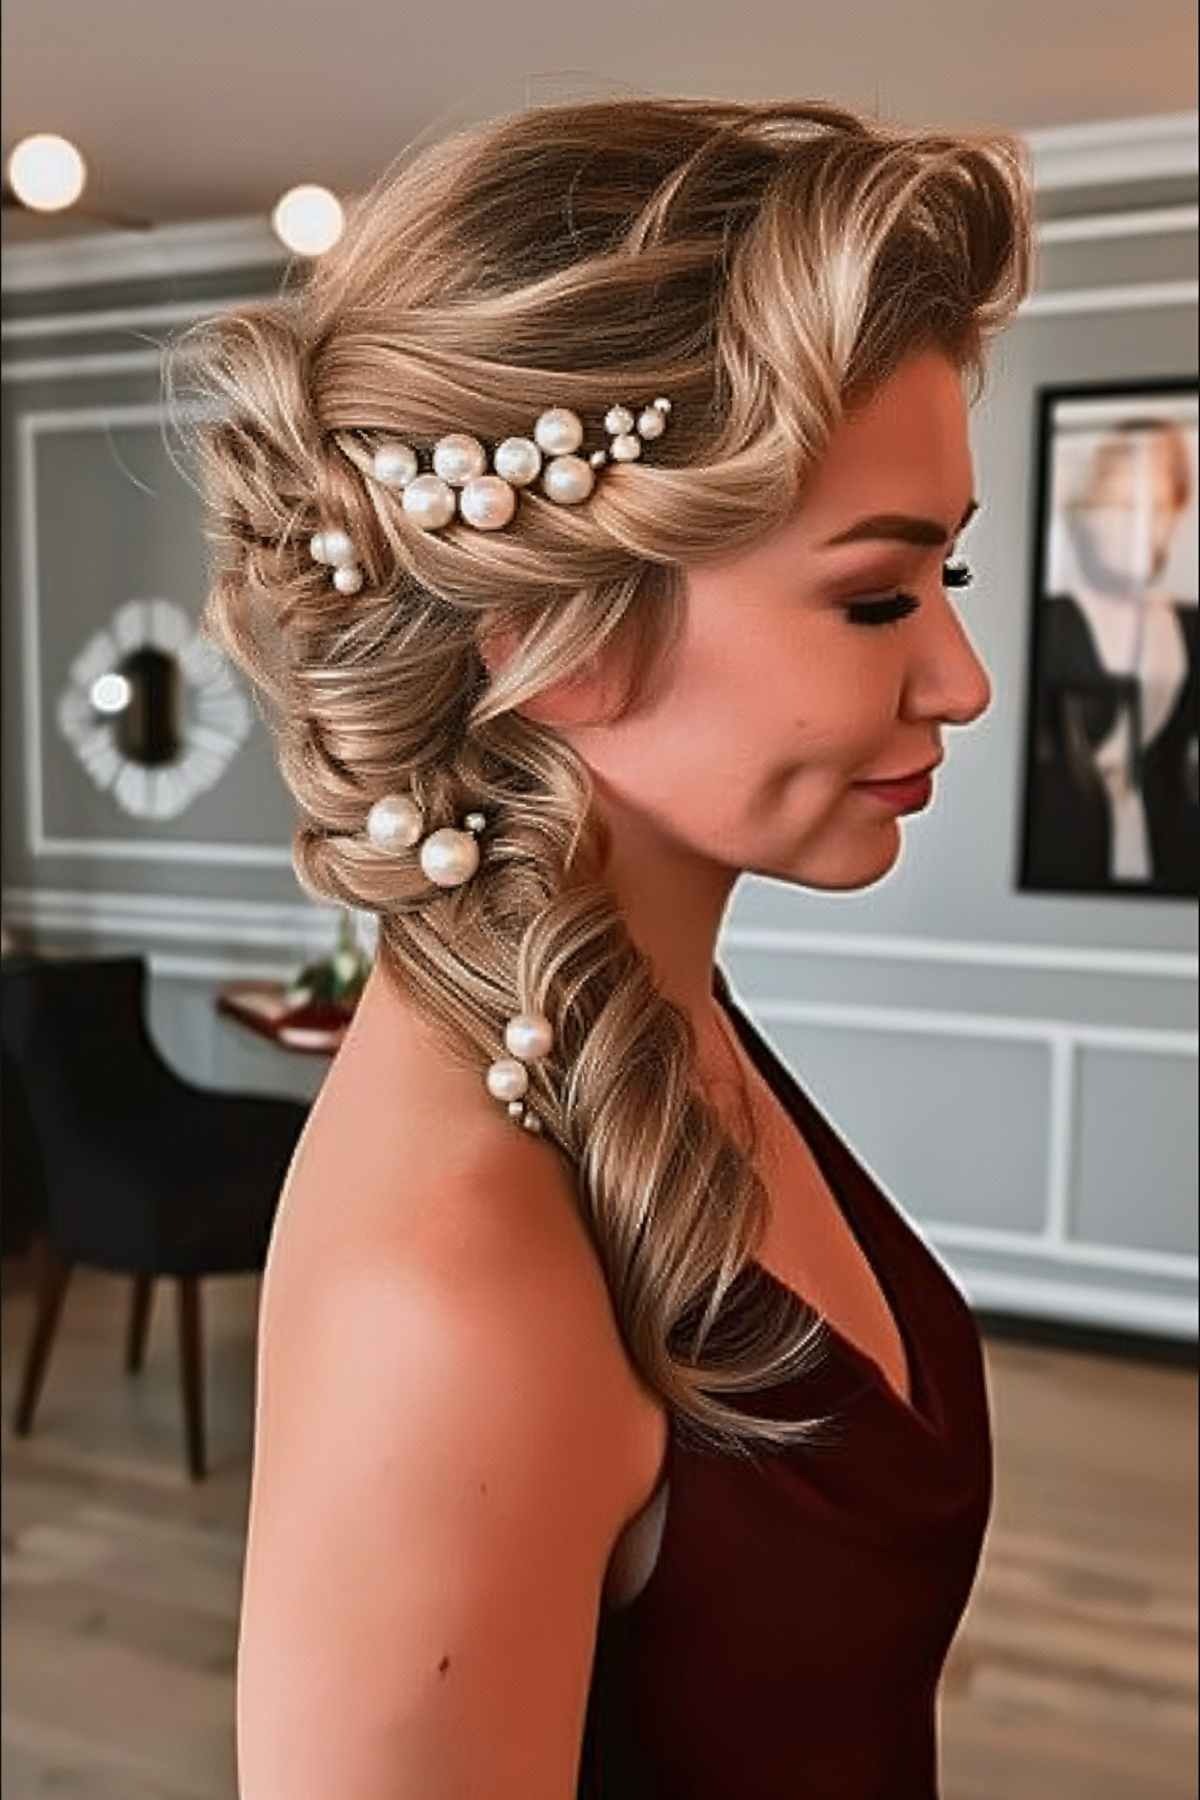 Elegant side-swept vintage curls adorned with pearl clips, creating a glamorous and textured hairstyle for a special event.